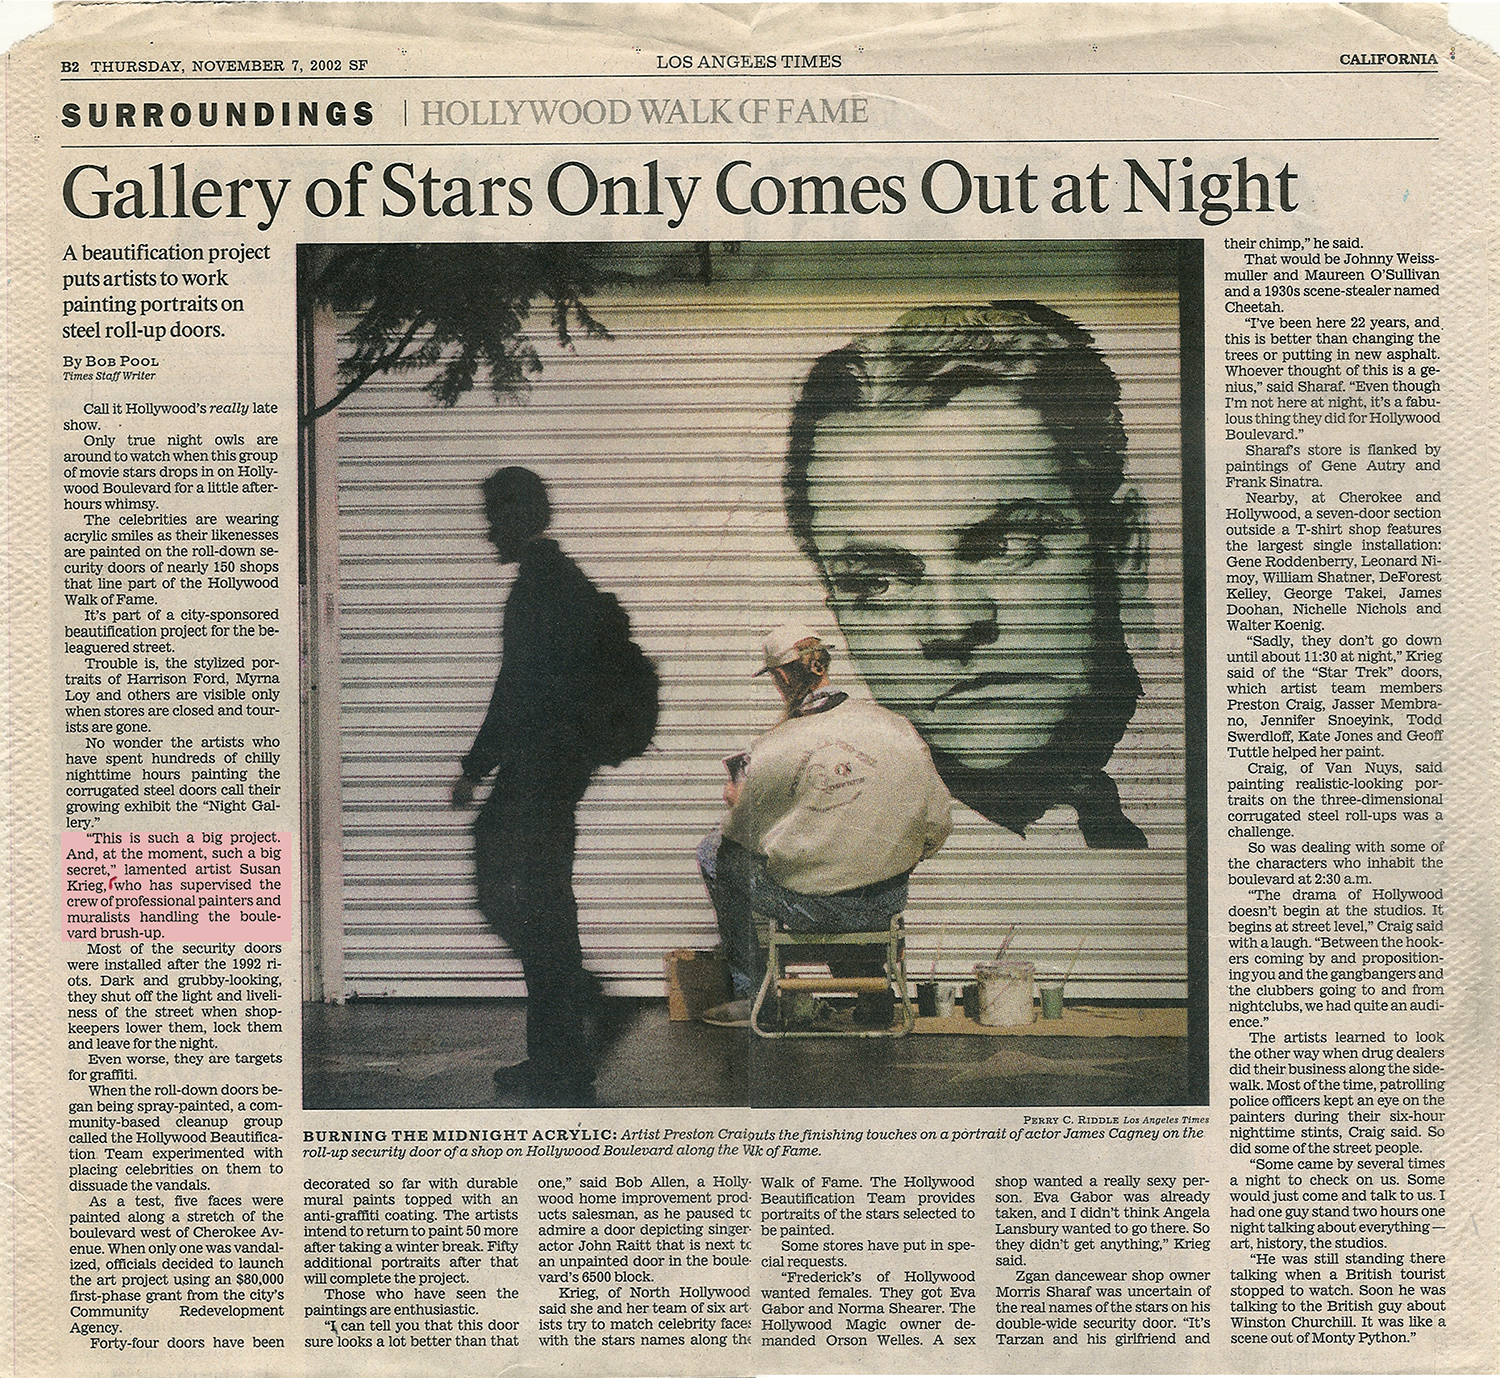 LA Times Article Gallery of Stars Only Comes Out at Night